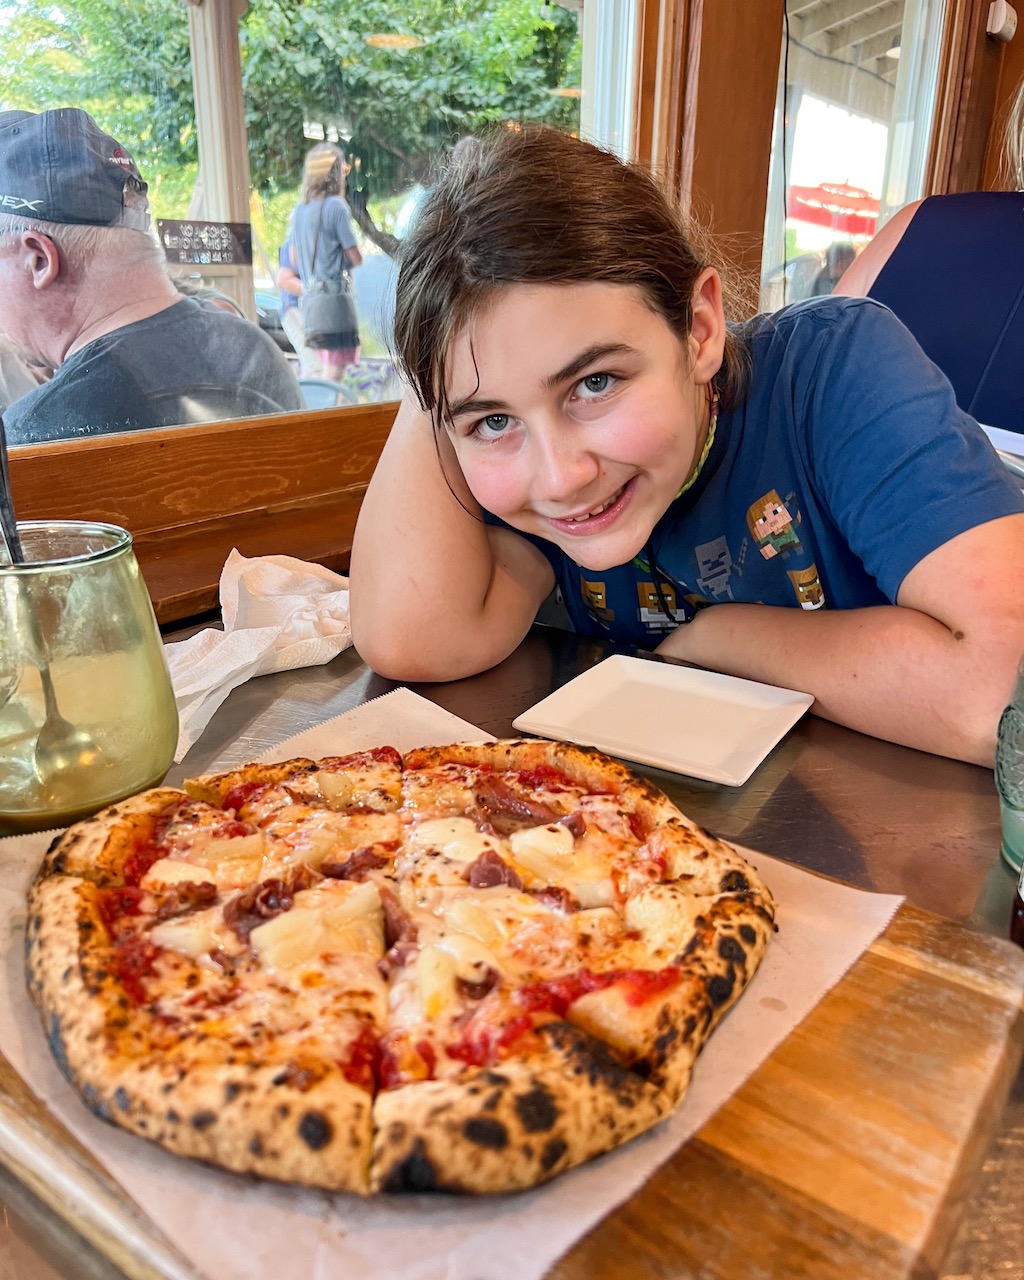 Kids and adults have plenty of pizza options to choose from (including gluten-free) at HopTown Pizza in Wapato, next door to Zillah, WA.